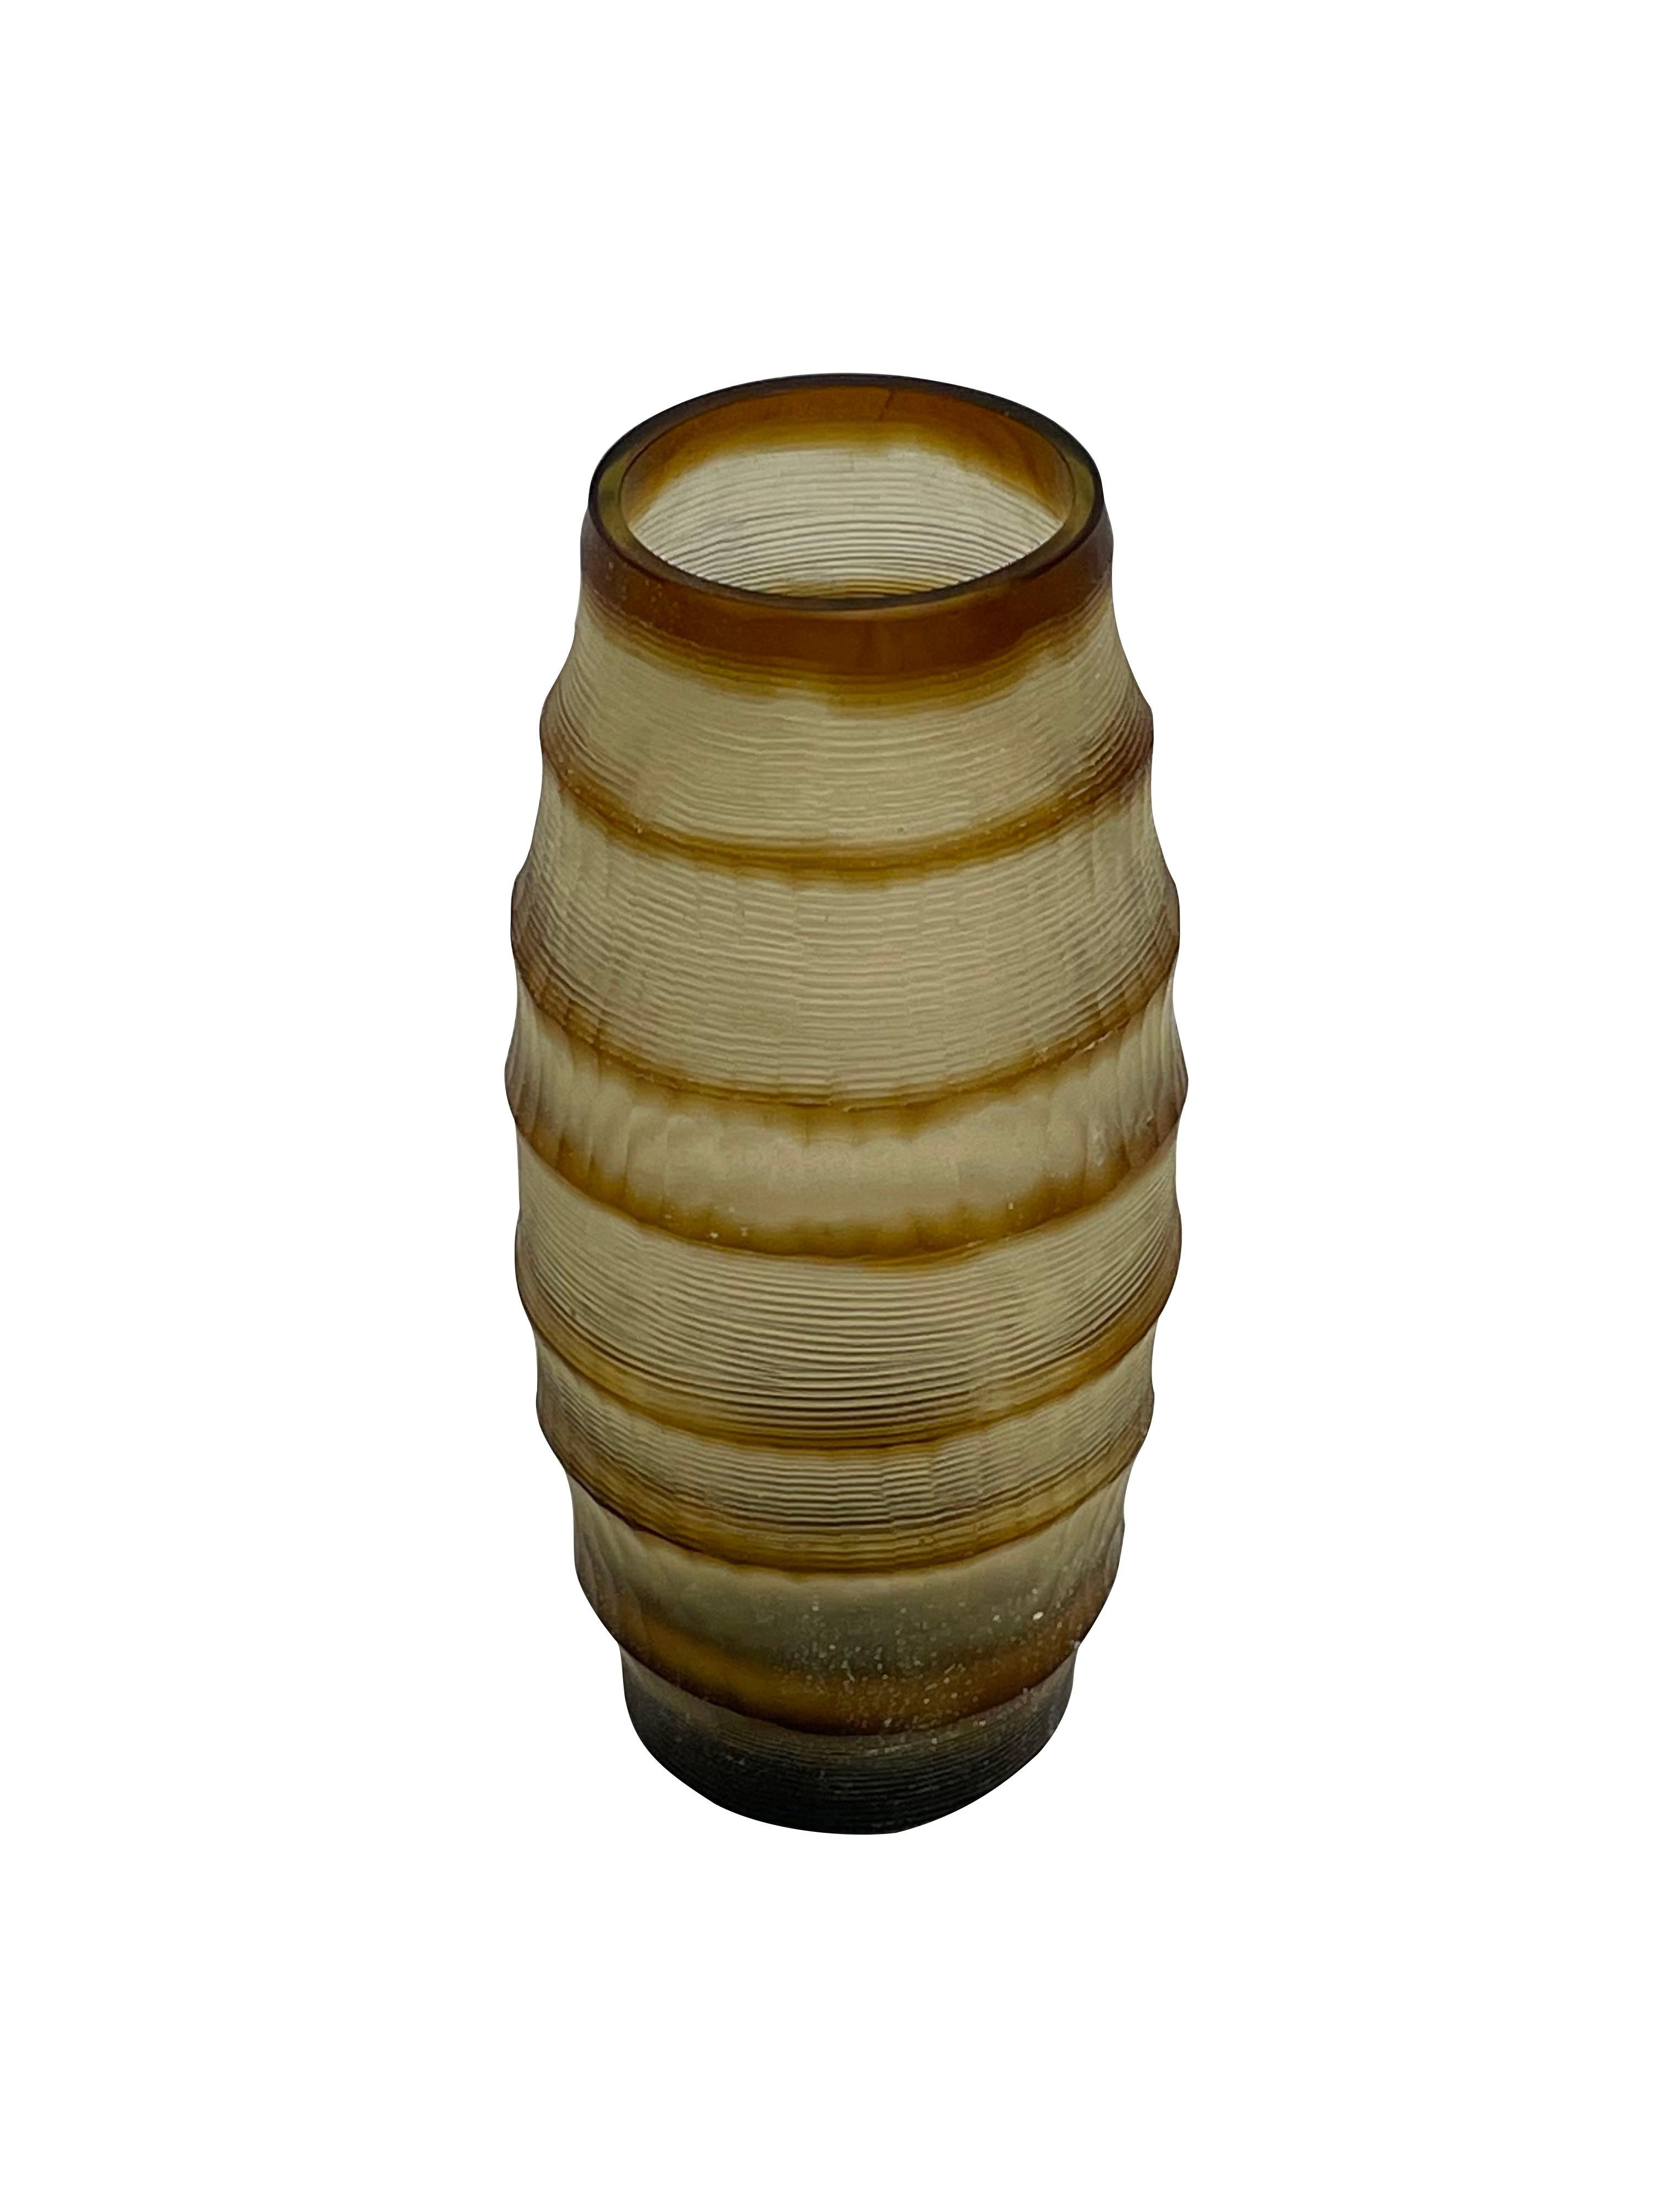 Contemporary Romanian horizontal ribbed and striped brown glass vase.
Tall cylinder shape.
Sits well with taller version S6114.